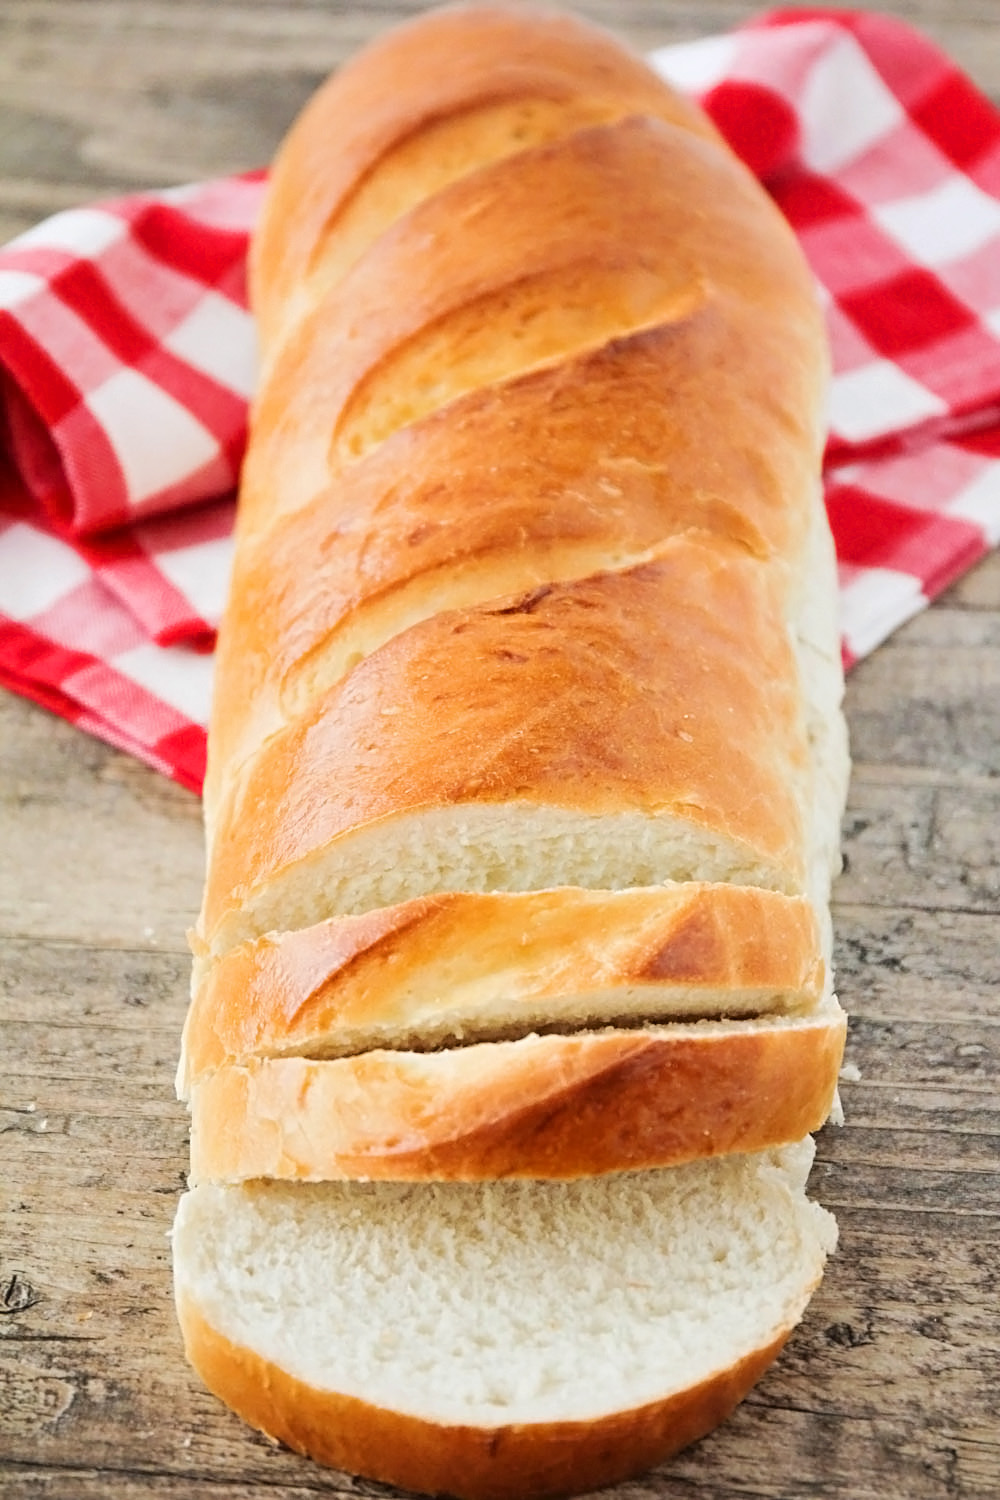 This soft and fluffy french bread is better than store-bought and so easy to make!